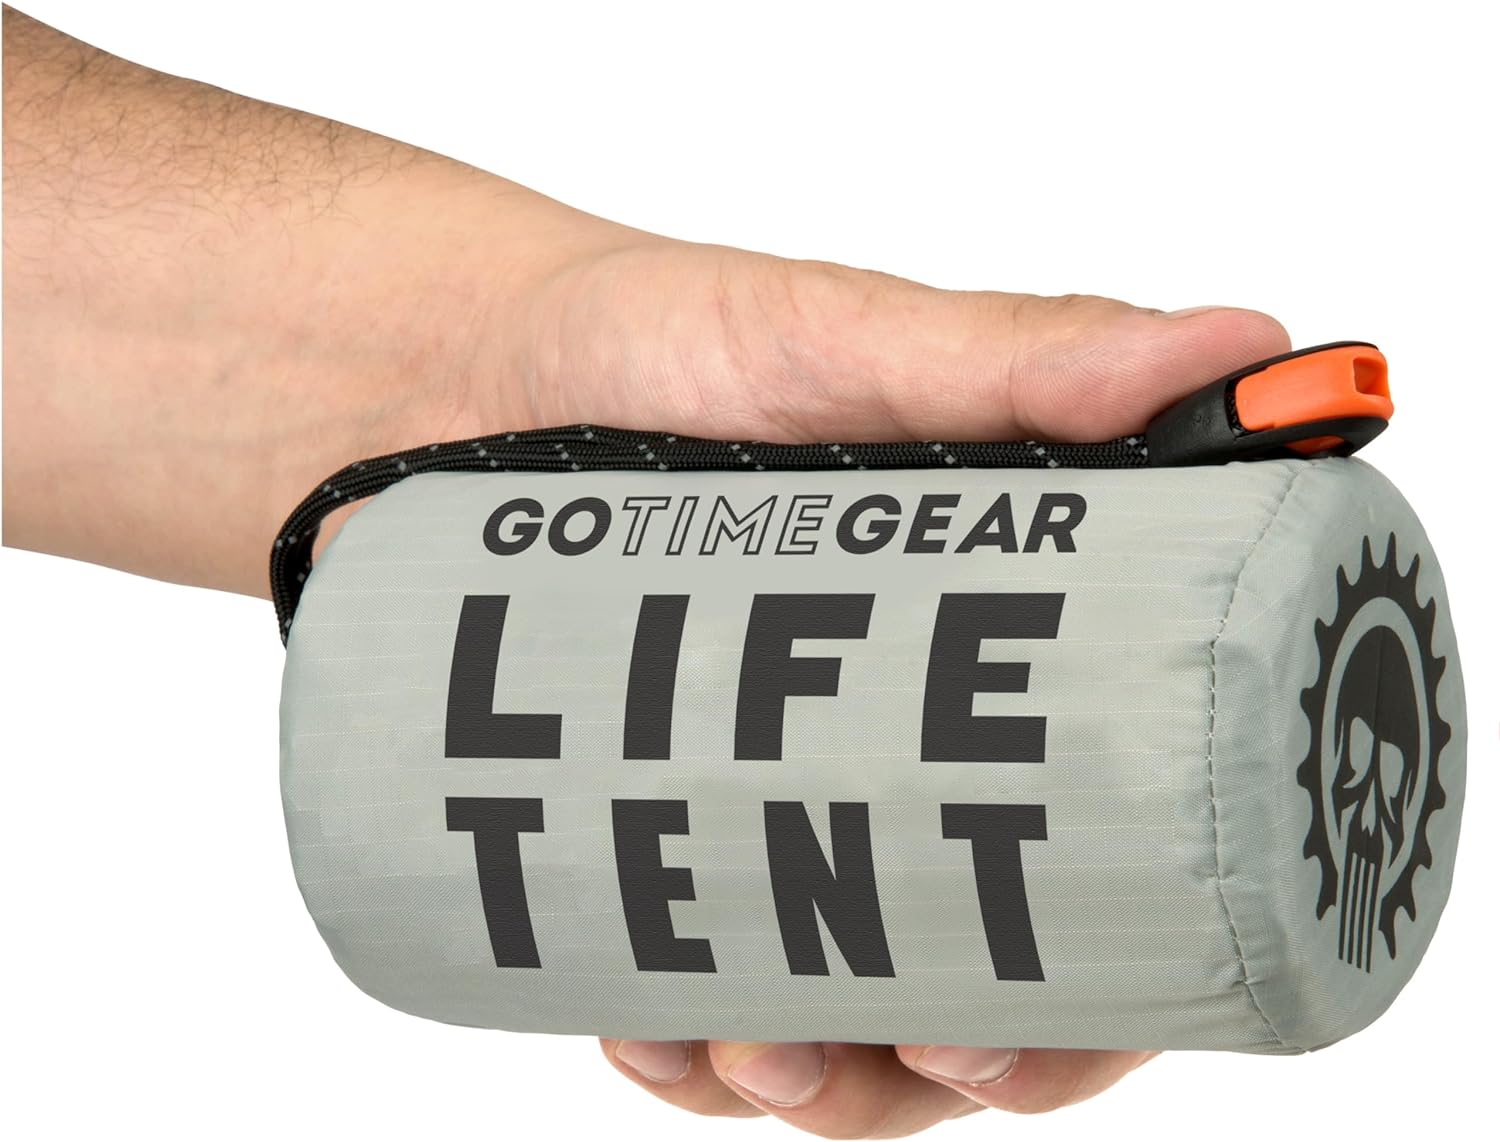 Go Time Gear Life Tent Emergency Survival Shelter Review